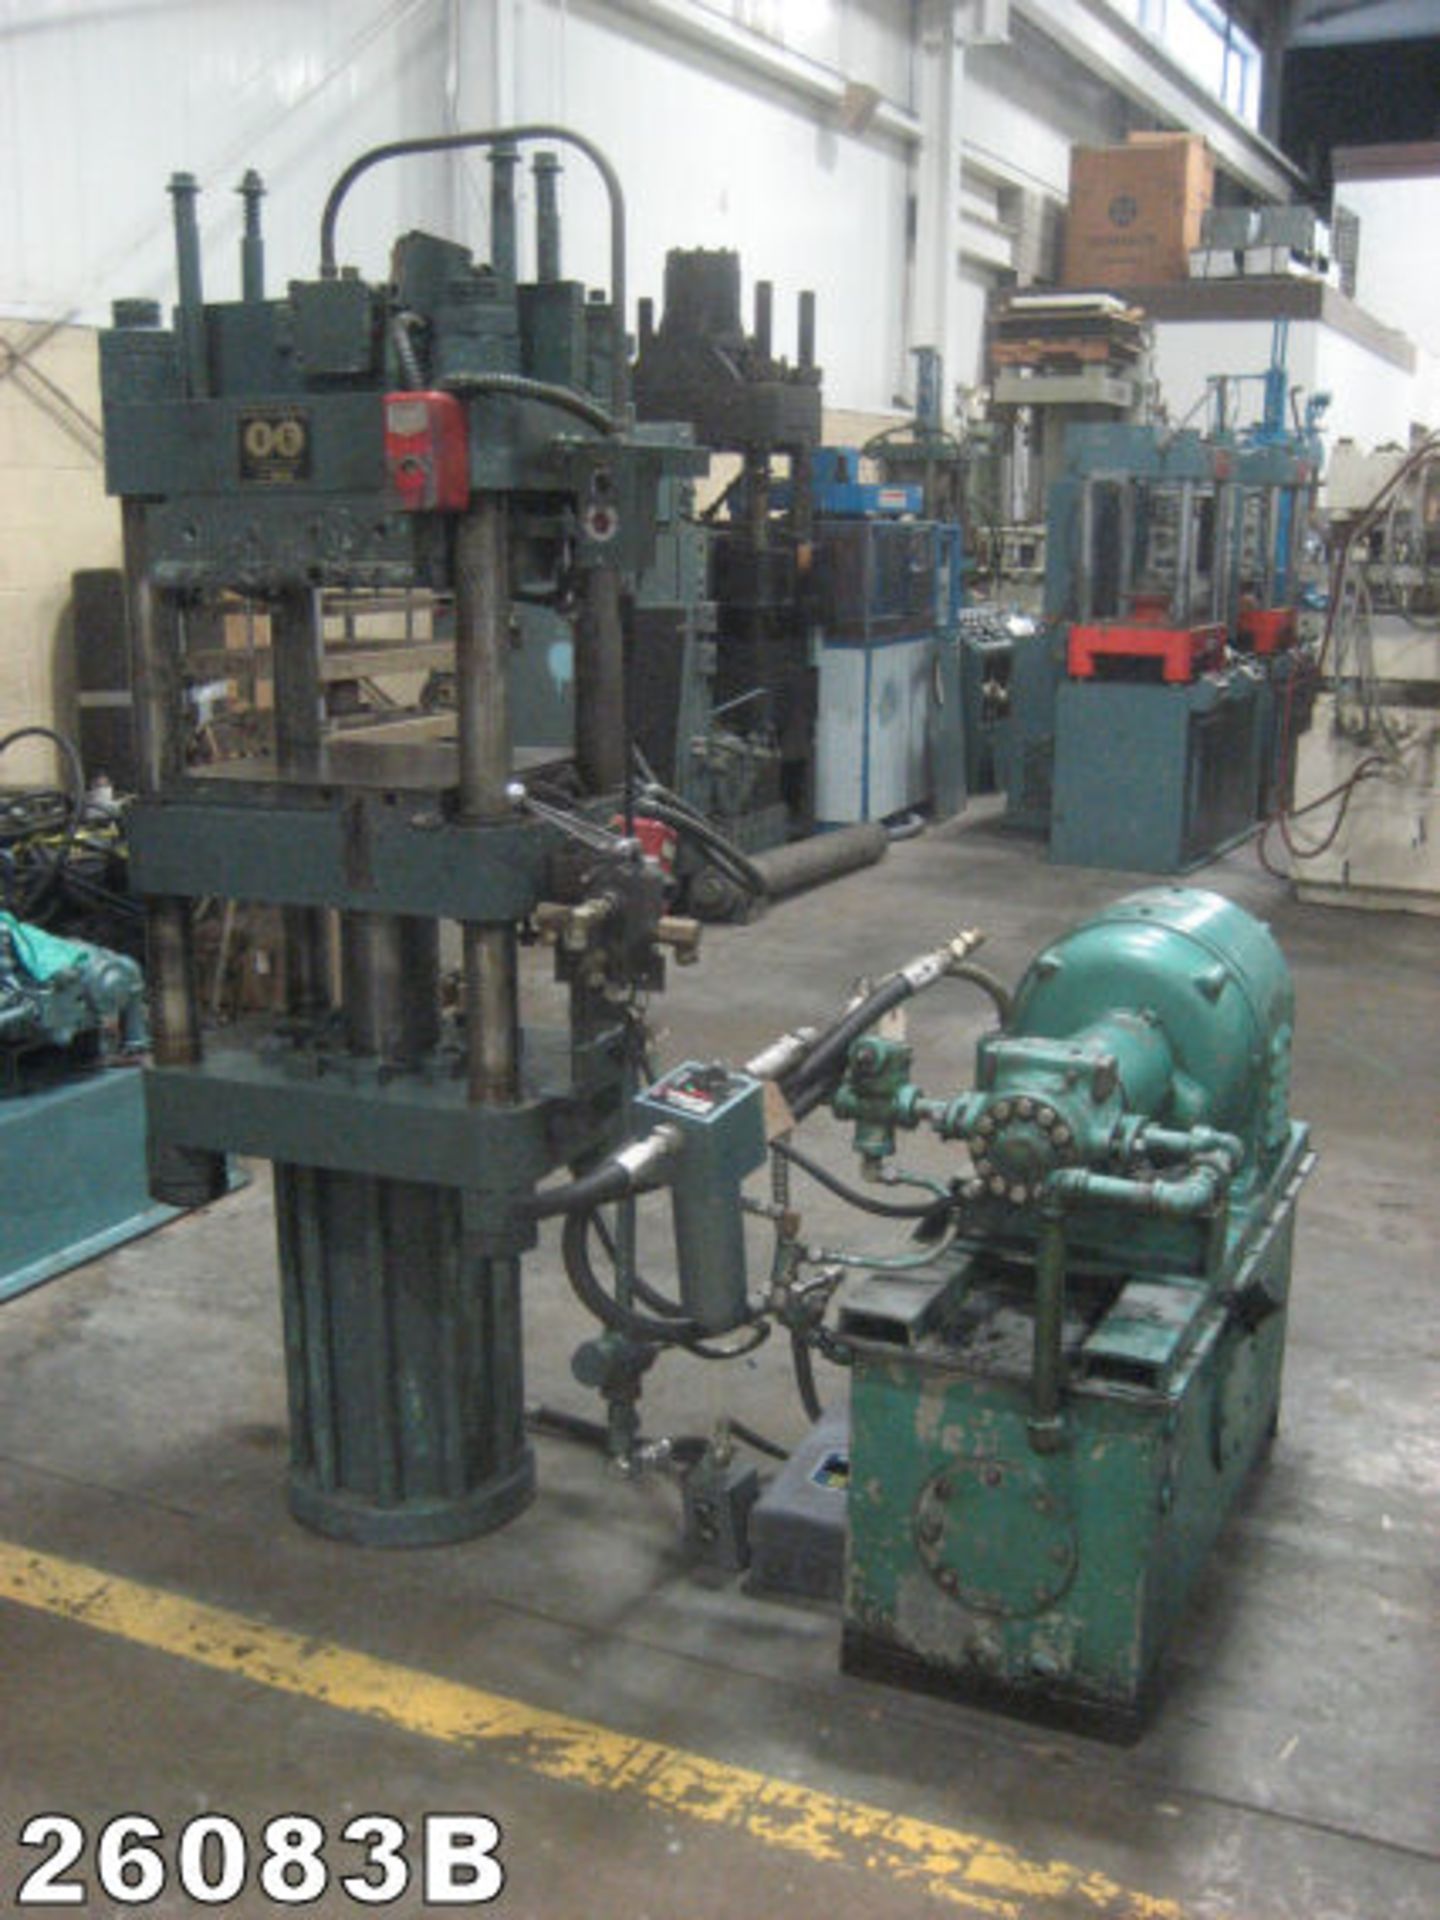 RUBBER EQUIPMENT 100 TON HOT PLATEN PRESS S/N RP-18-18-19 - Image 2 of 2